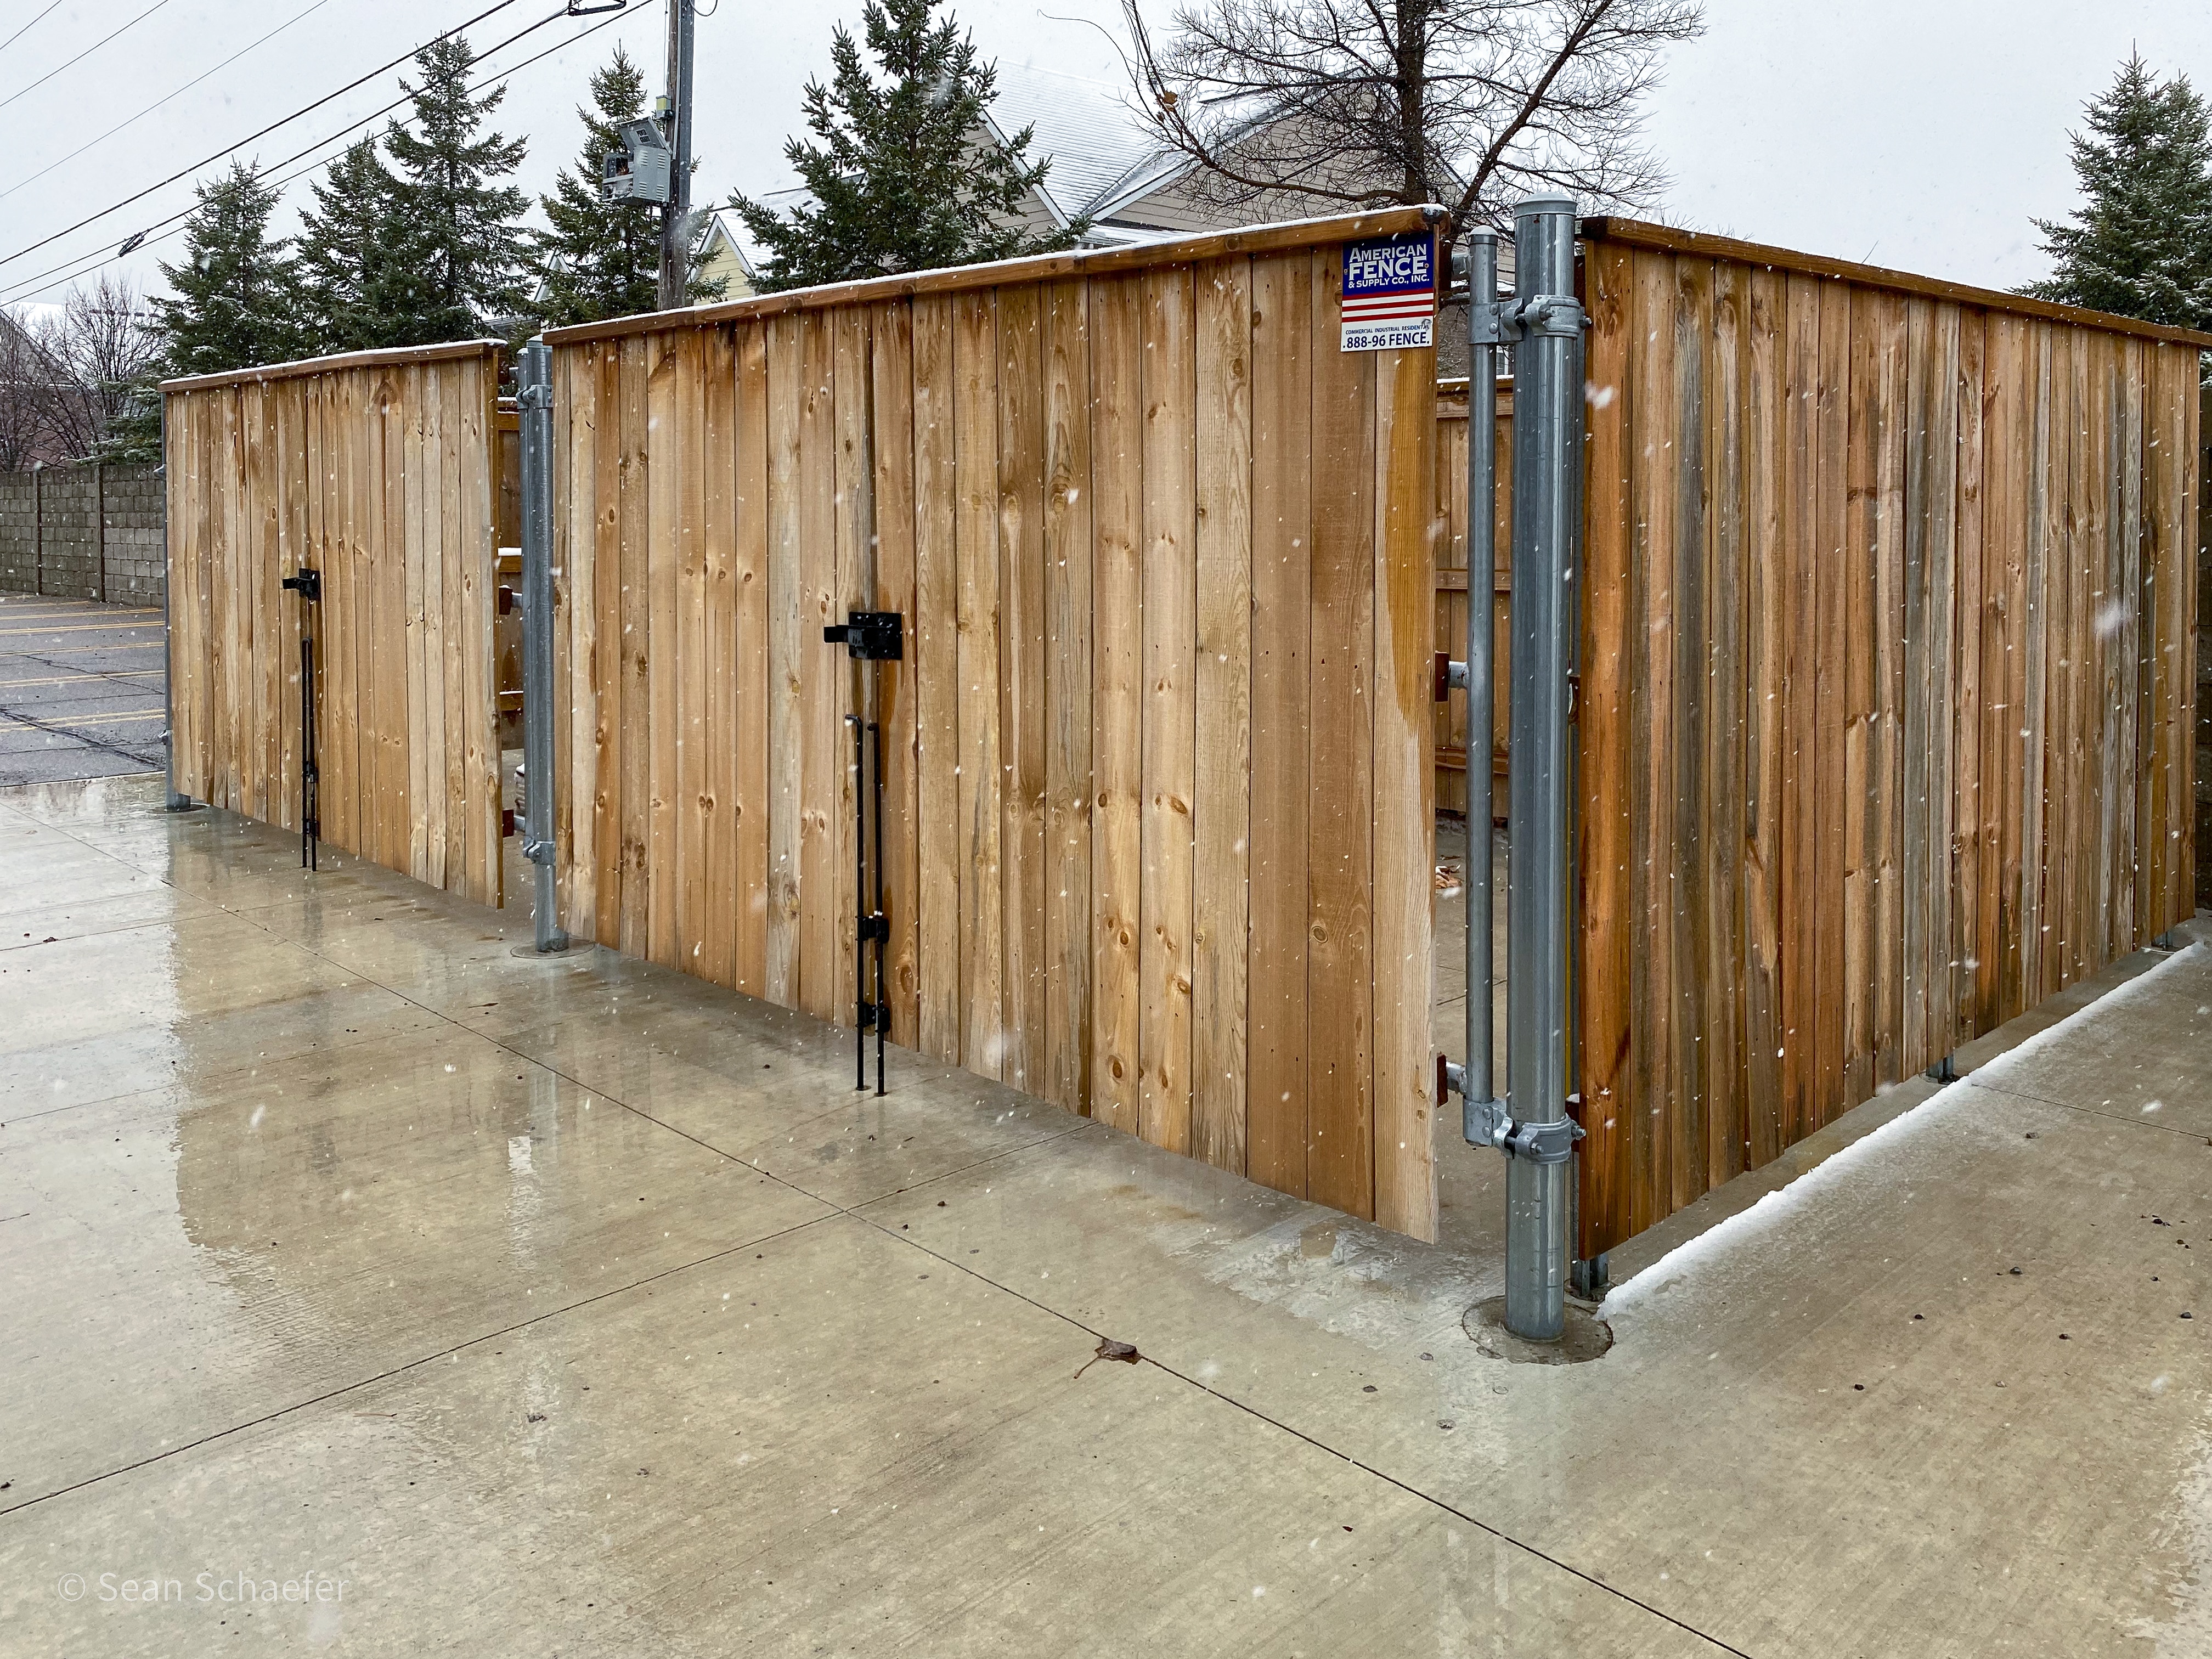 Commercial wood dumpster enclosure and gates in Metro Detroit, Michigan